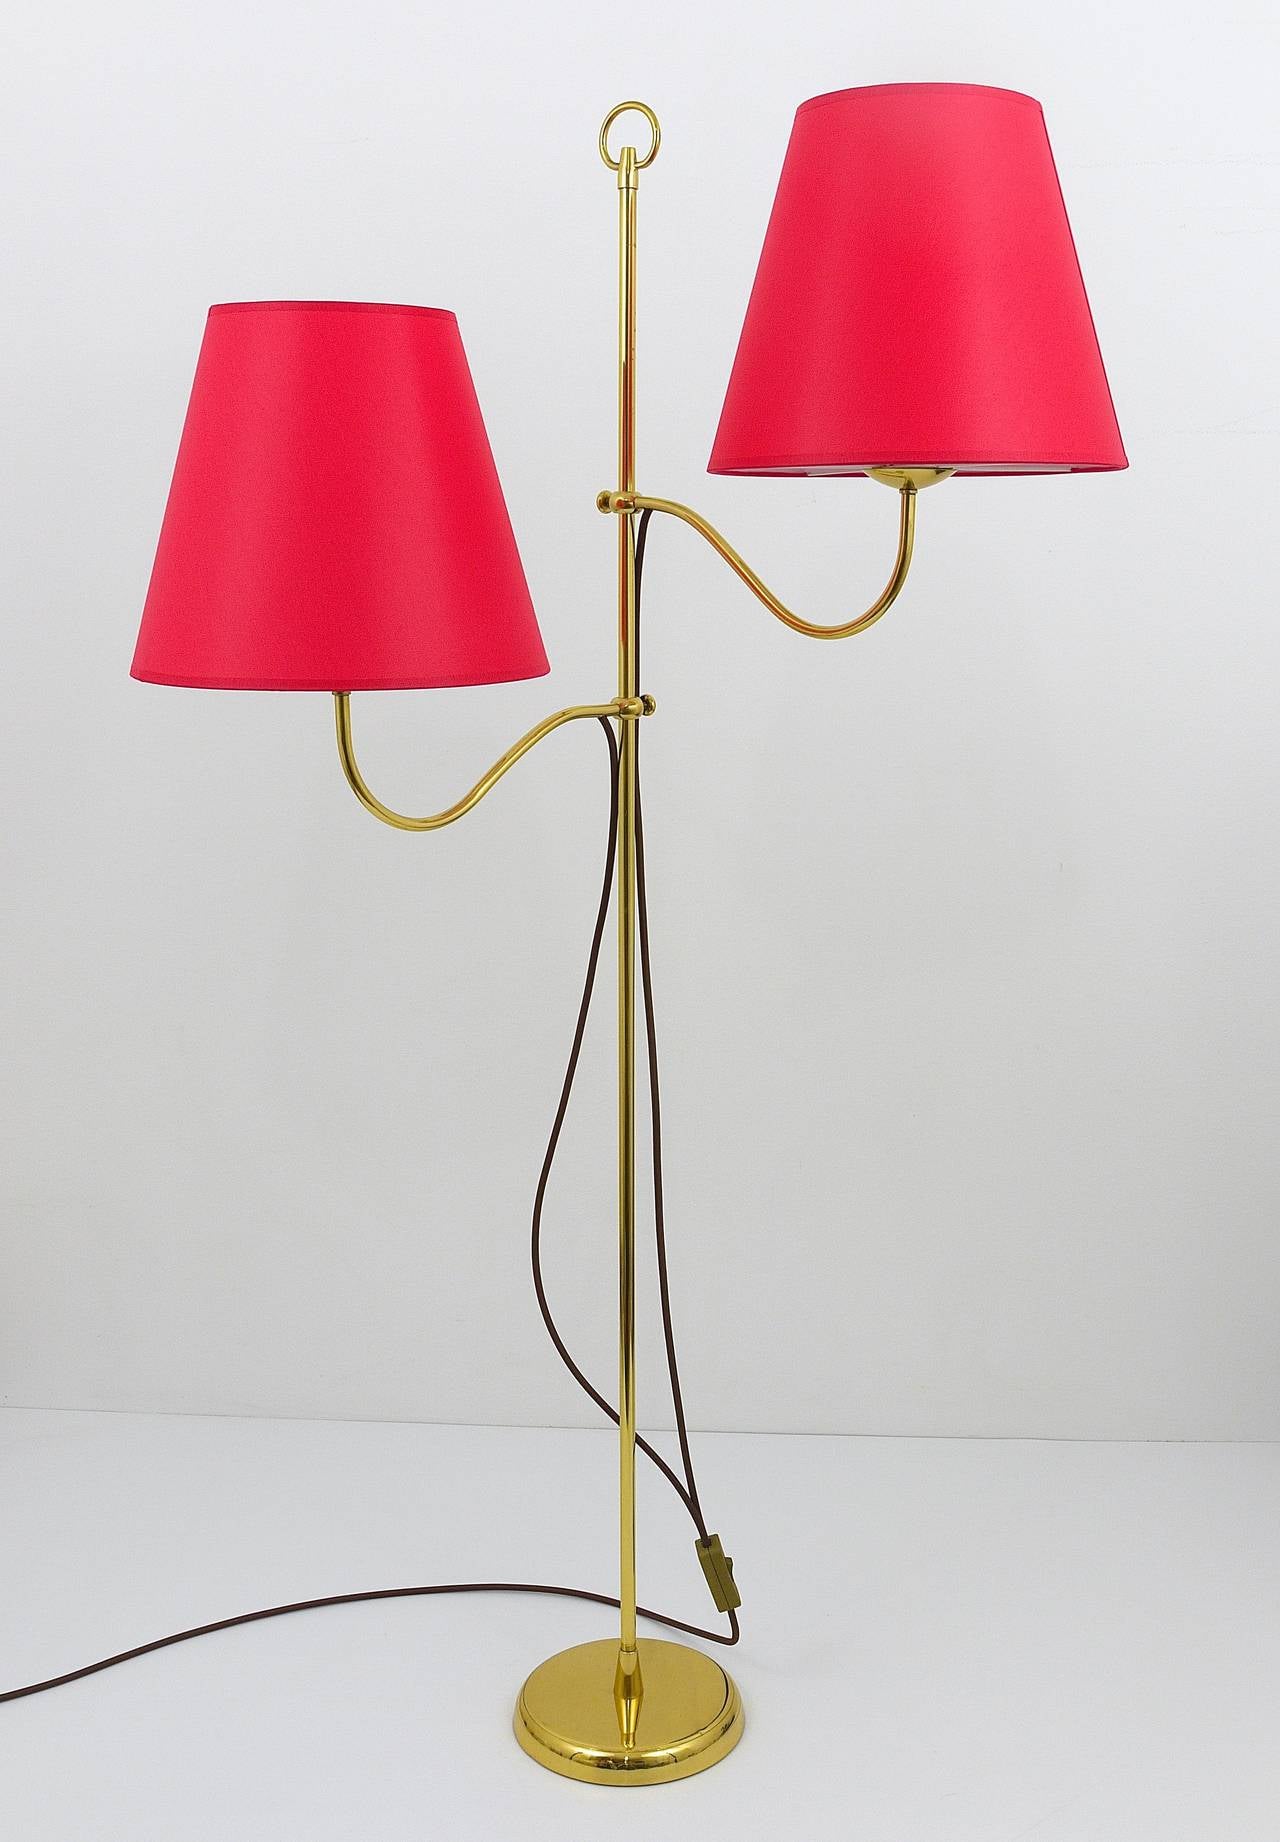 Elegant Two-Arms Mid-Century Brass Floor Lamp by Josef Frank, Austria, 1950 In Excellent Condition For Sale In Vienna, AT